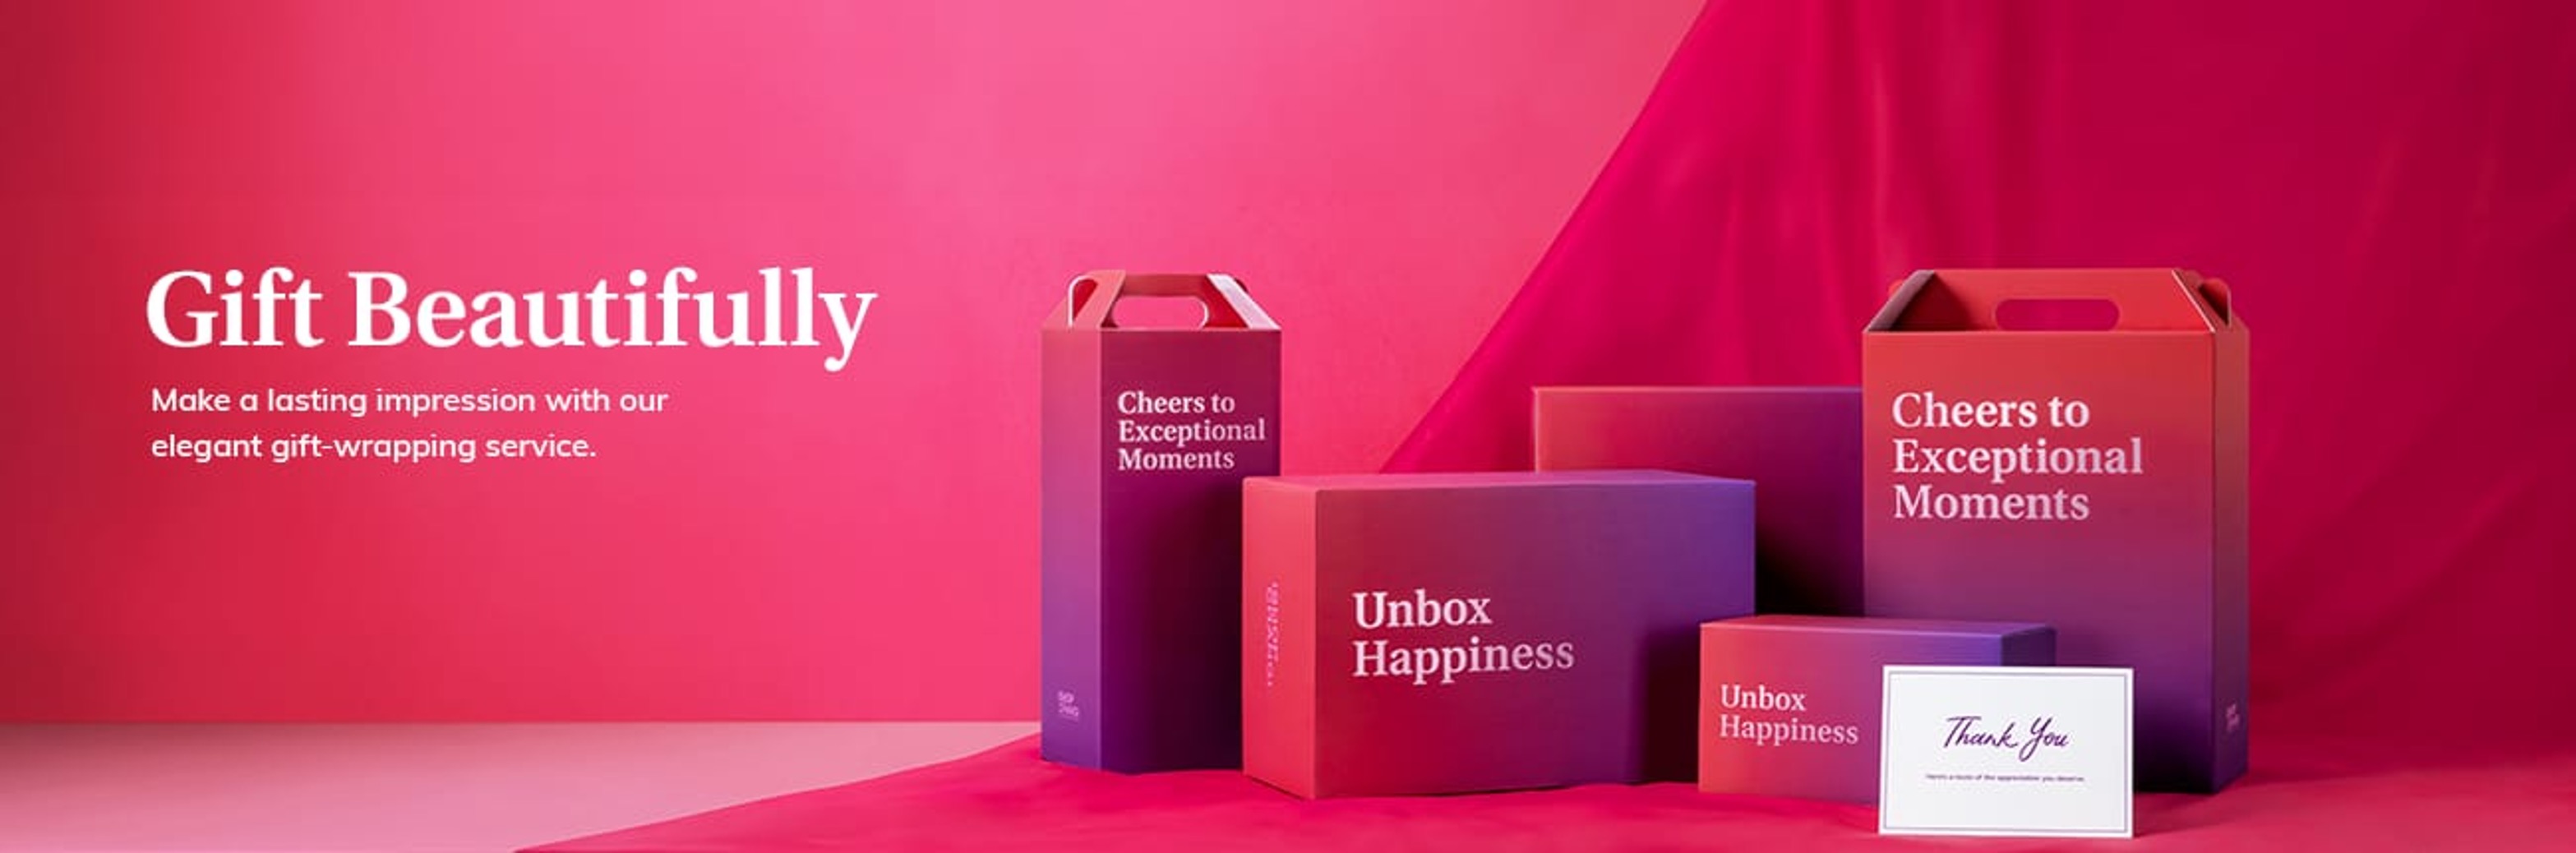 iShopChangi’s personalised gift wrapping service goes the extra mile to offer a thoughtful gifting experience.